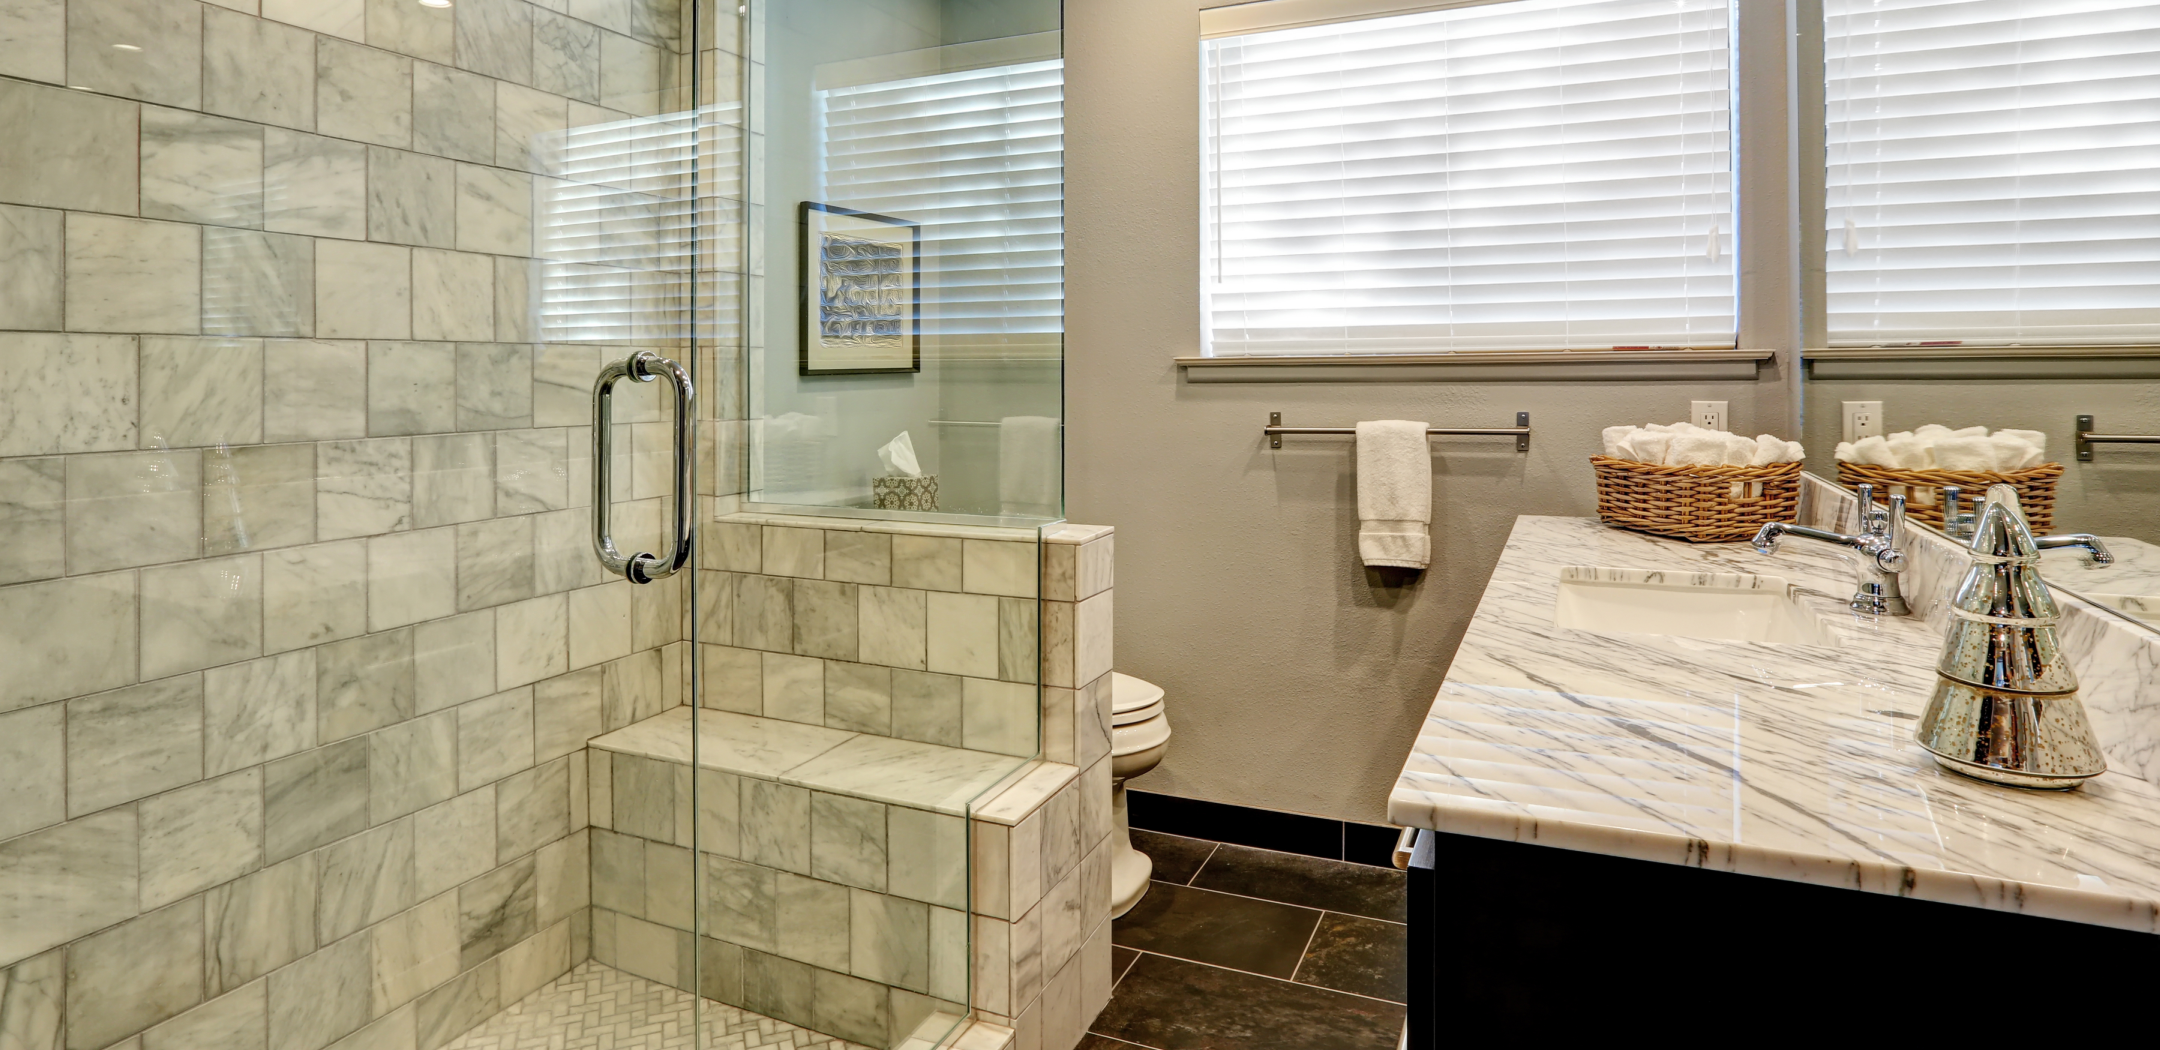 Bathroom Remodeling Services In Hanover Ma Michael Morse